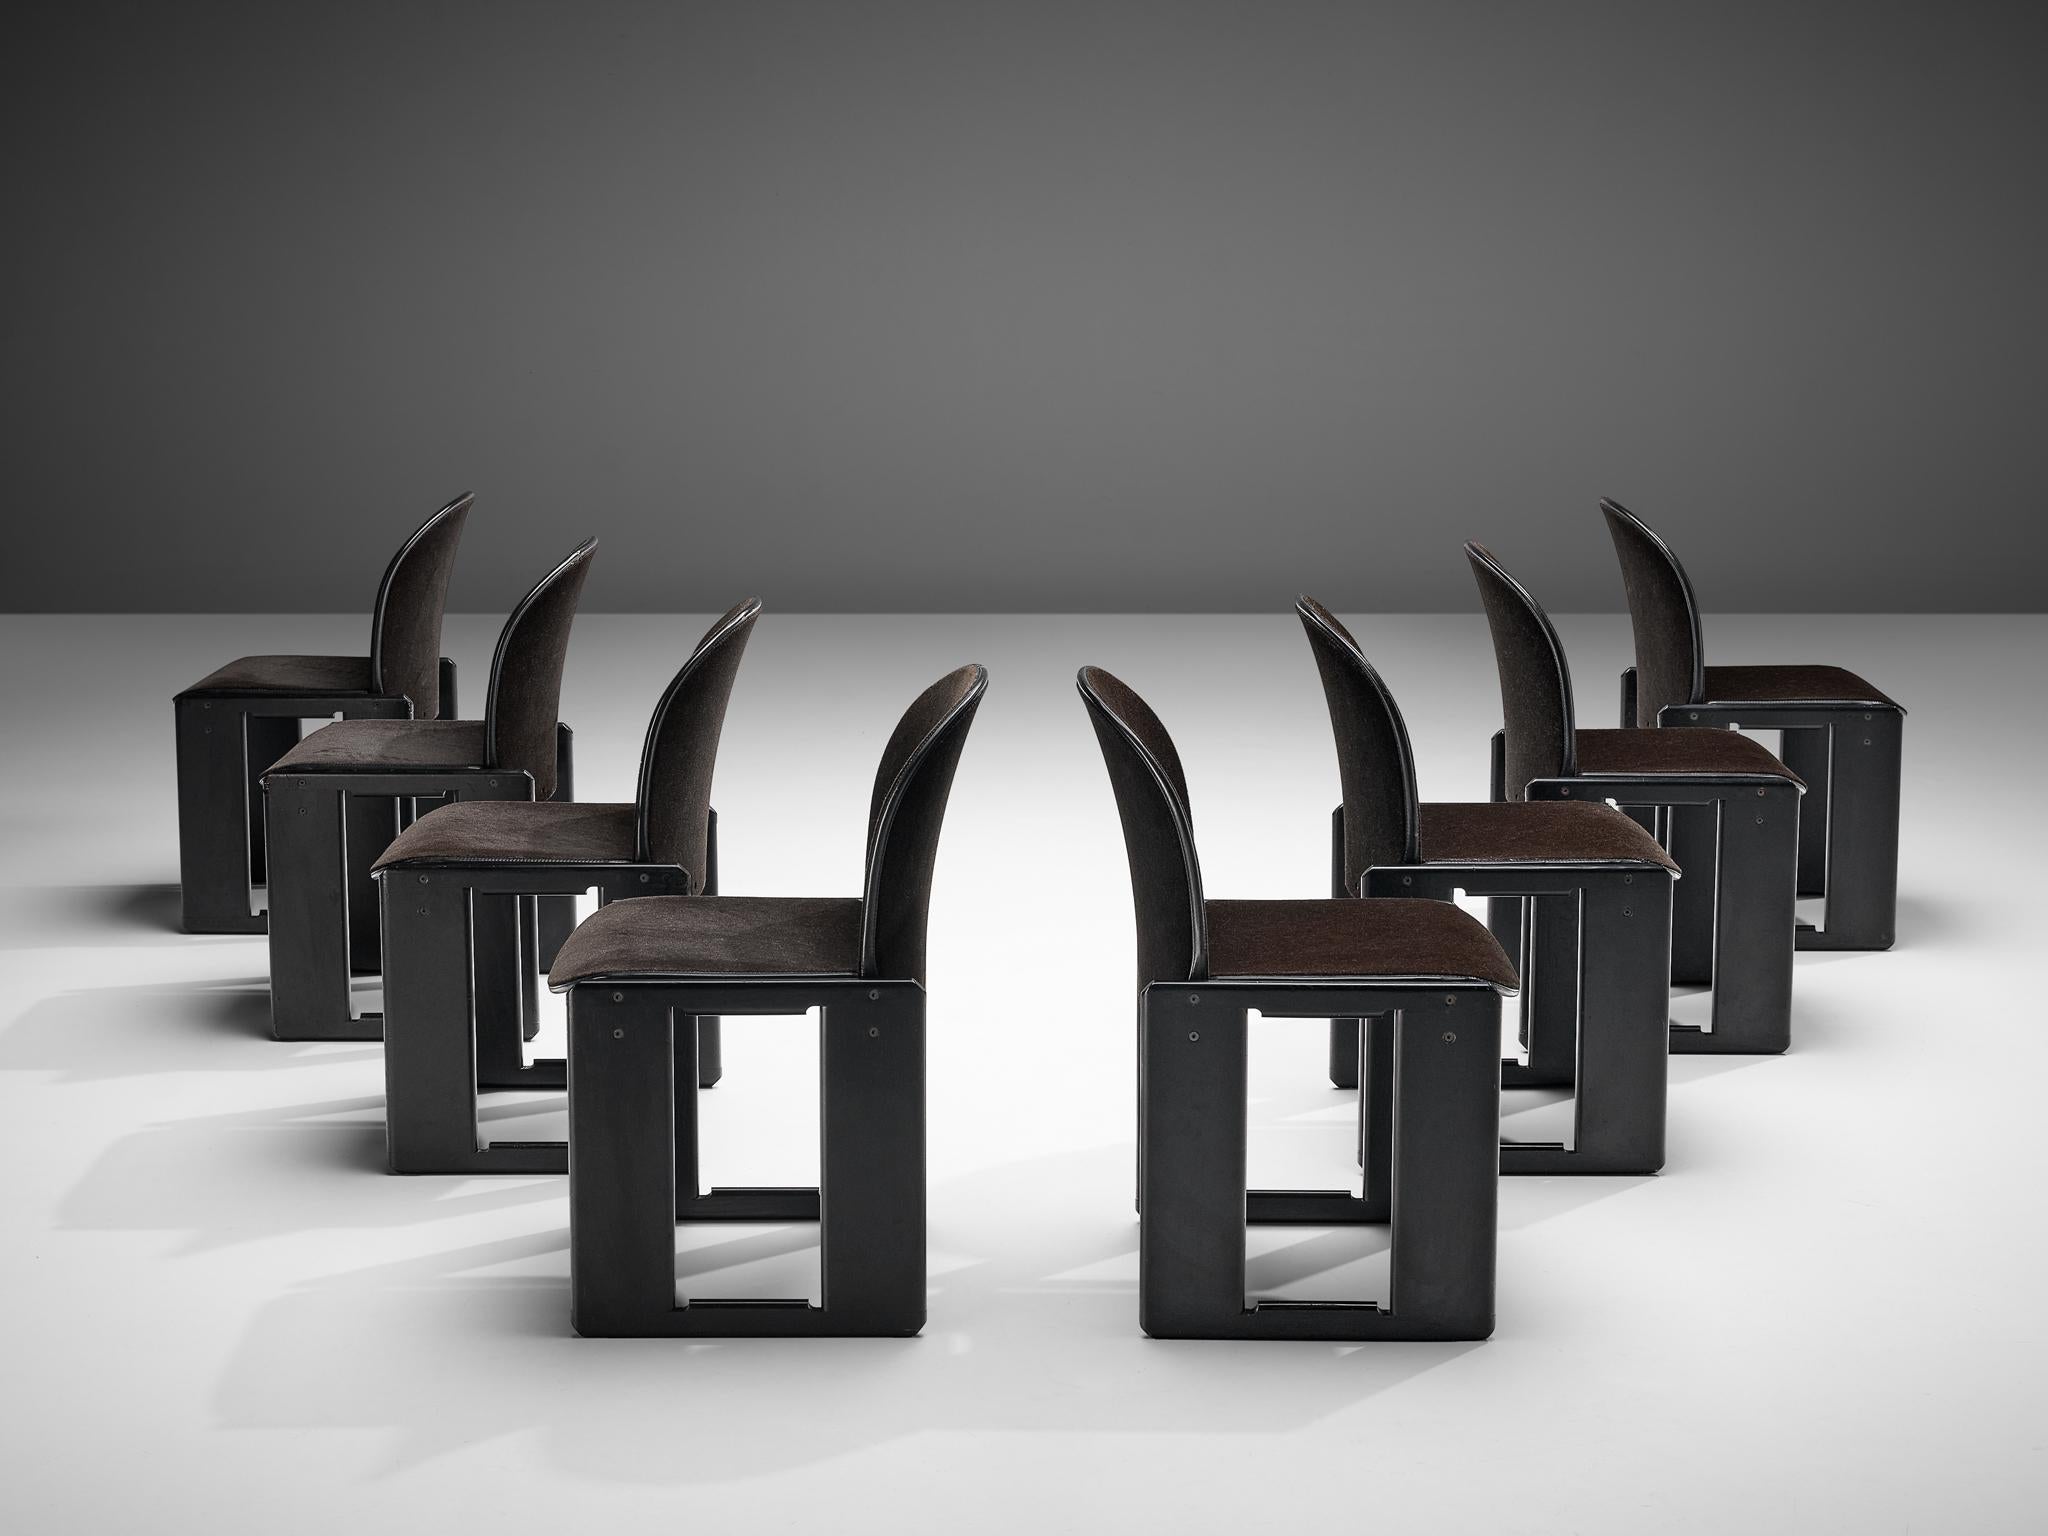 Afra and Tobia Scarpa for B&B, set of eight ‘Dialogo’ dining chairs, black lacquered wood, dark brown velvet upholstery, Italy, 1970s
 
The ‘Dialogo’ dining chair was designed by Afra and Tobia Scarpa in the 1970s and convinces with its two